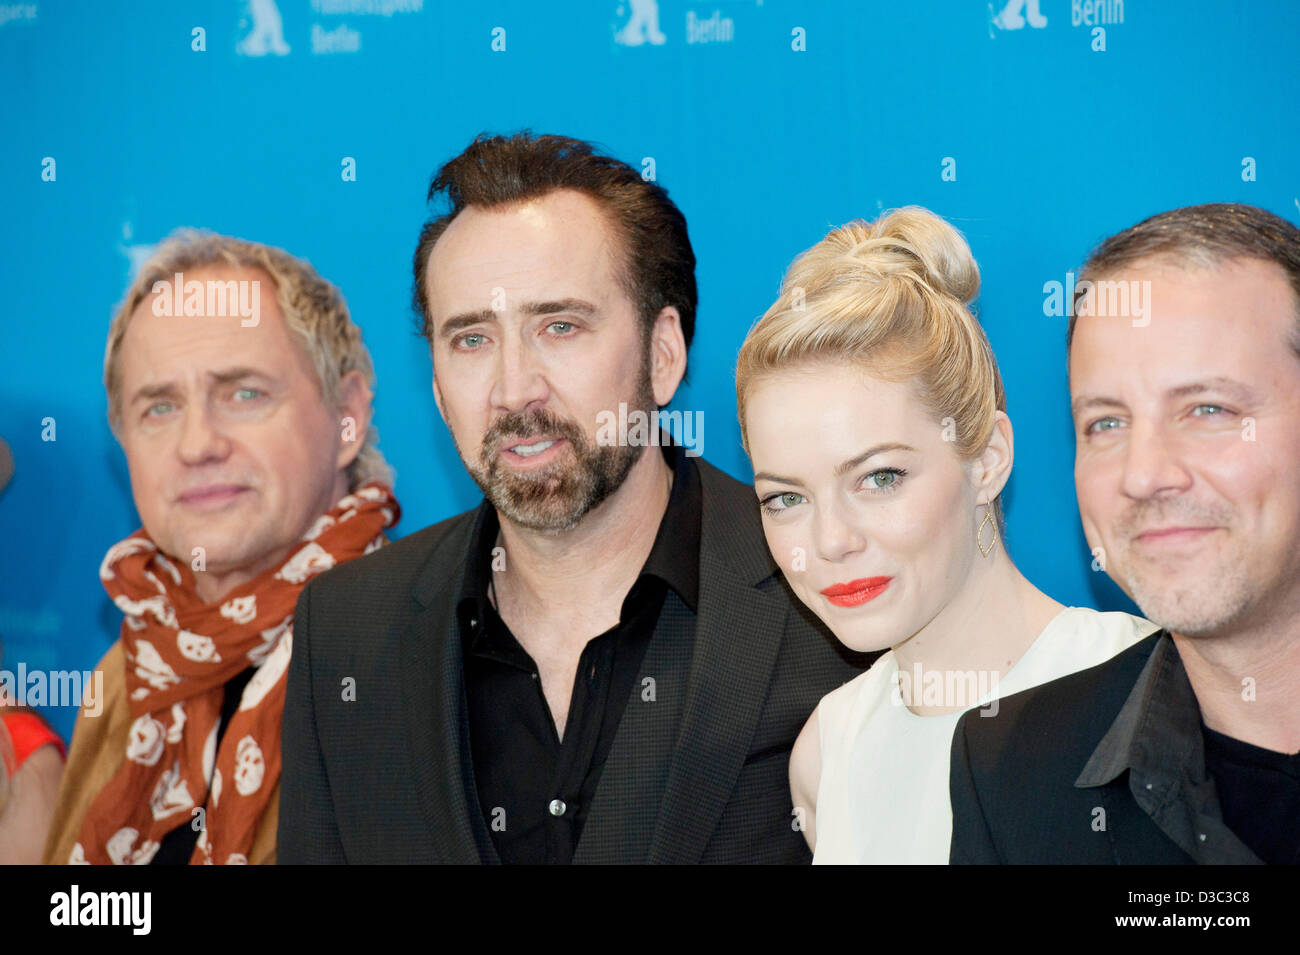 Berlin, Germany. February 15, 2013. Uwe Ochsenknecht, Nicolas Cage, Emma Stone and Kirk DeMicco attending 'The Croods' photocall at the 63rd Berlin International Film Festival, Berlinale. Credit DPA/Alamy Live News. Stock Photo